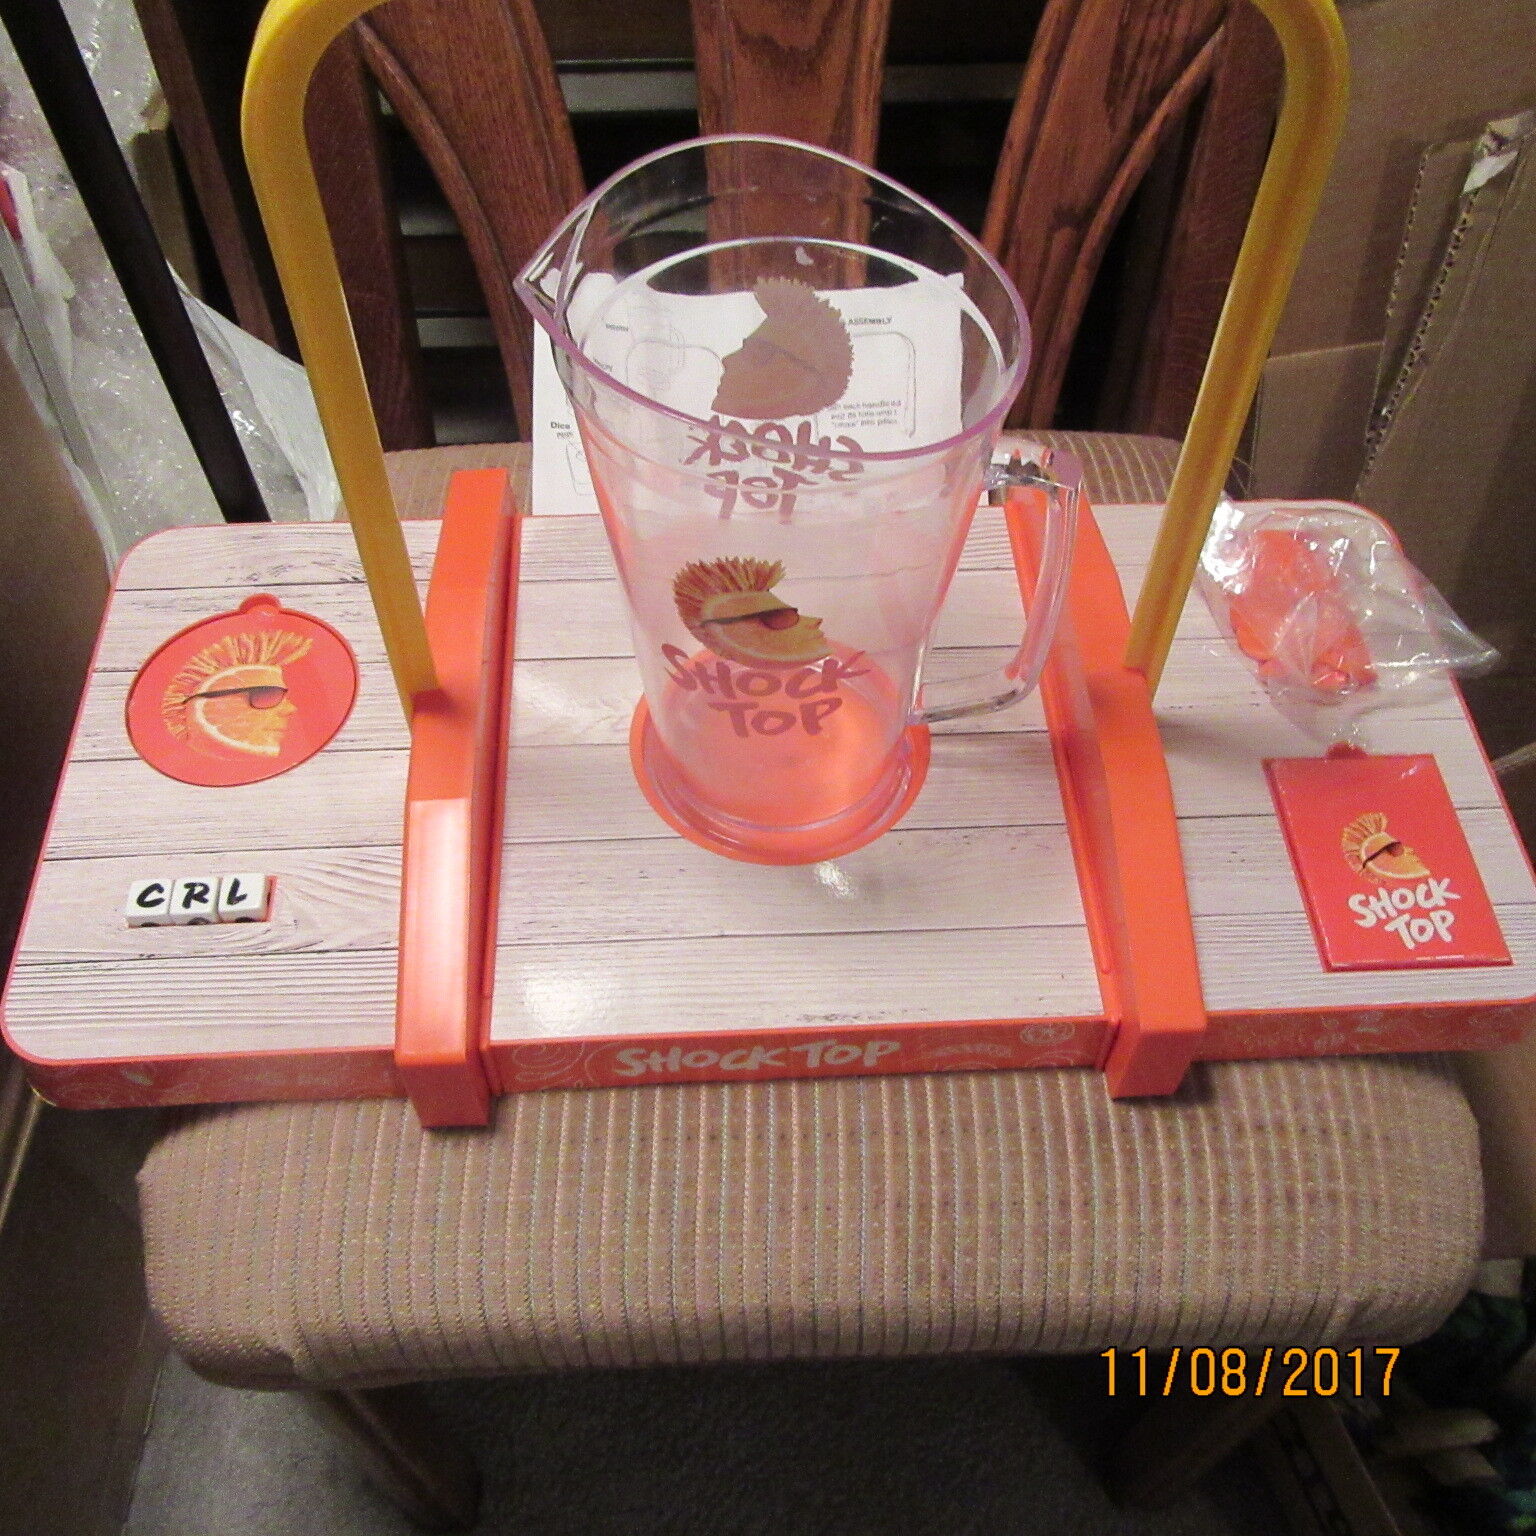 RARE SHOCK TOP BEER GAME WITH A PITCHER, 2 DIFF. CARDS, 3 DI, PLASTIC CHIPS--NEW